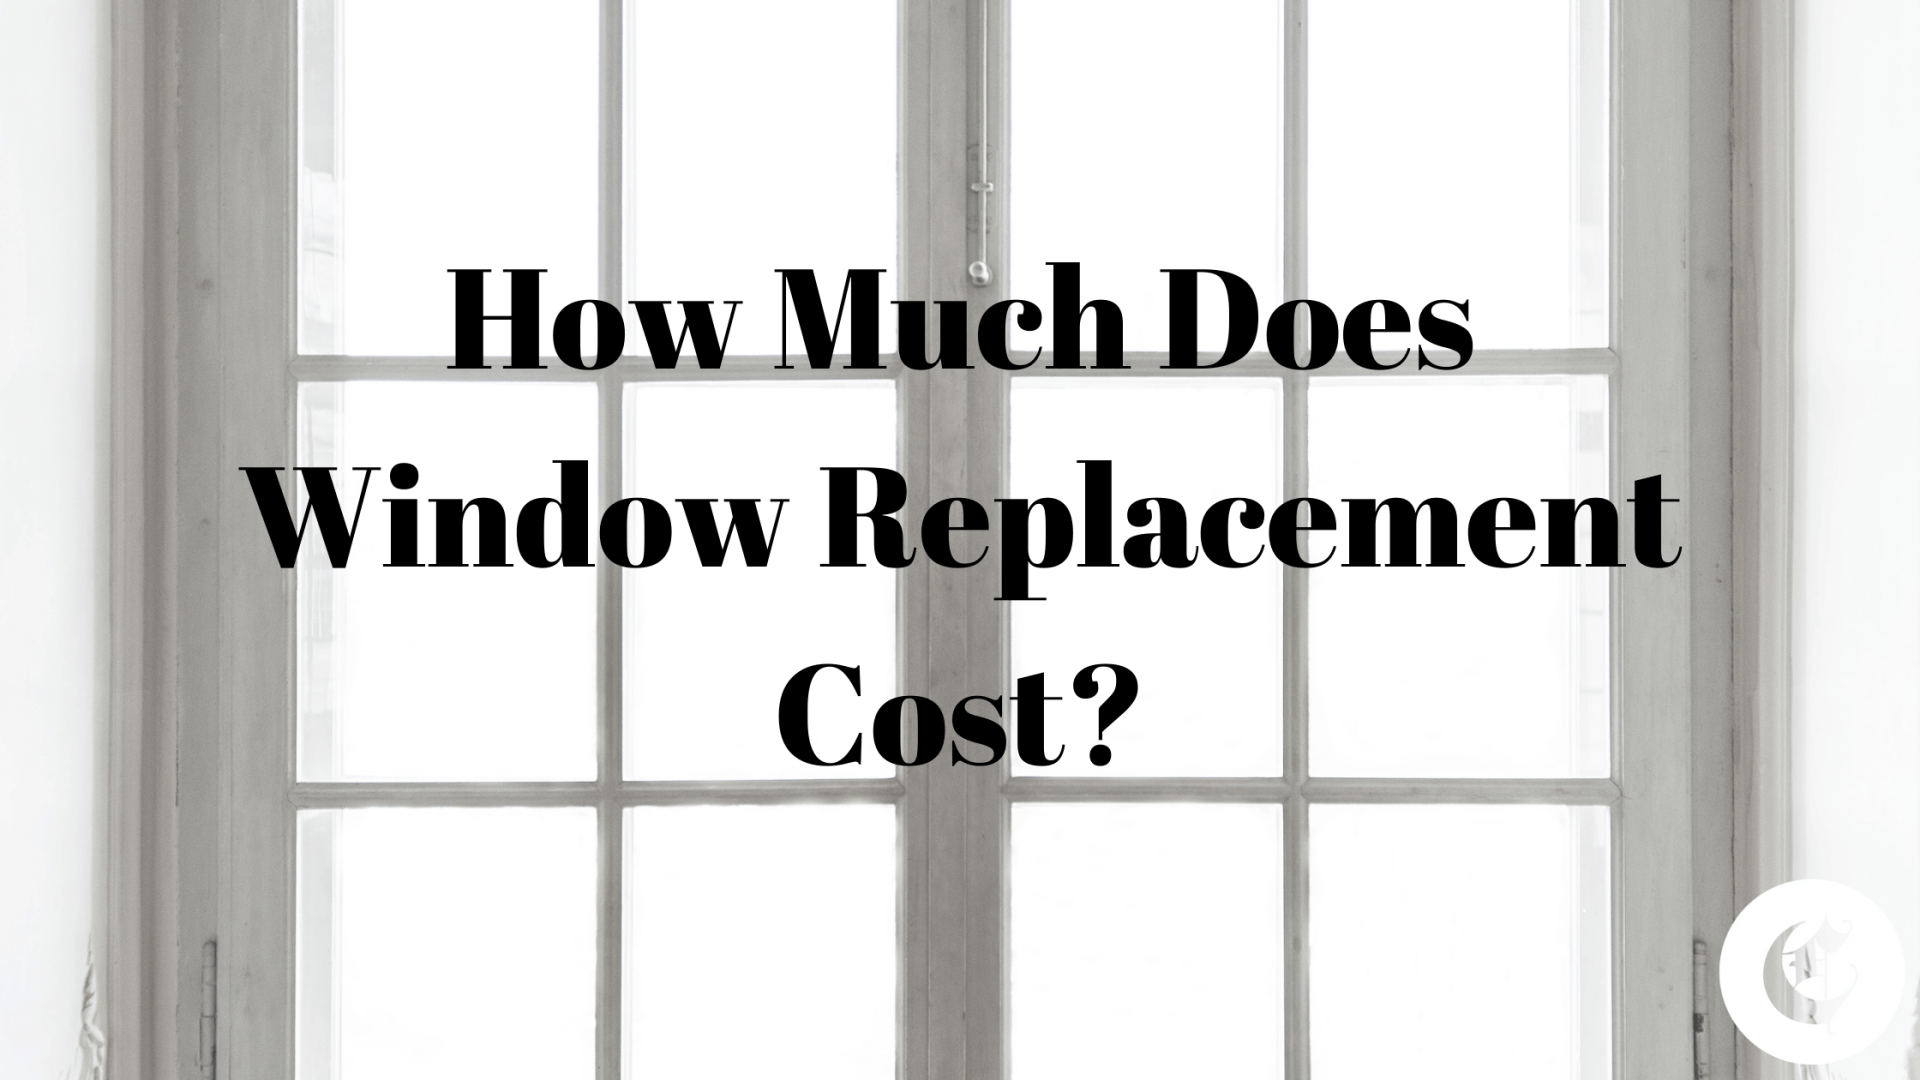 Cost of window replacement, window installation contractor near me, Beresford, Sioux Fall, SD